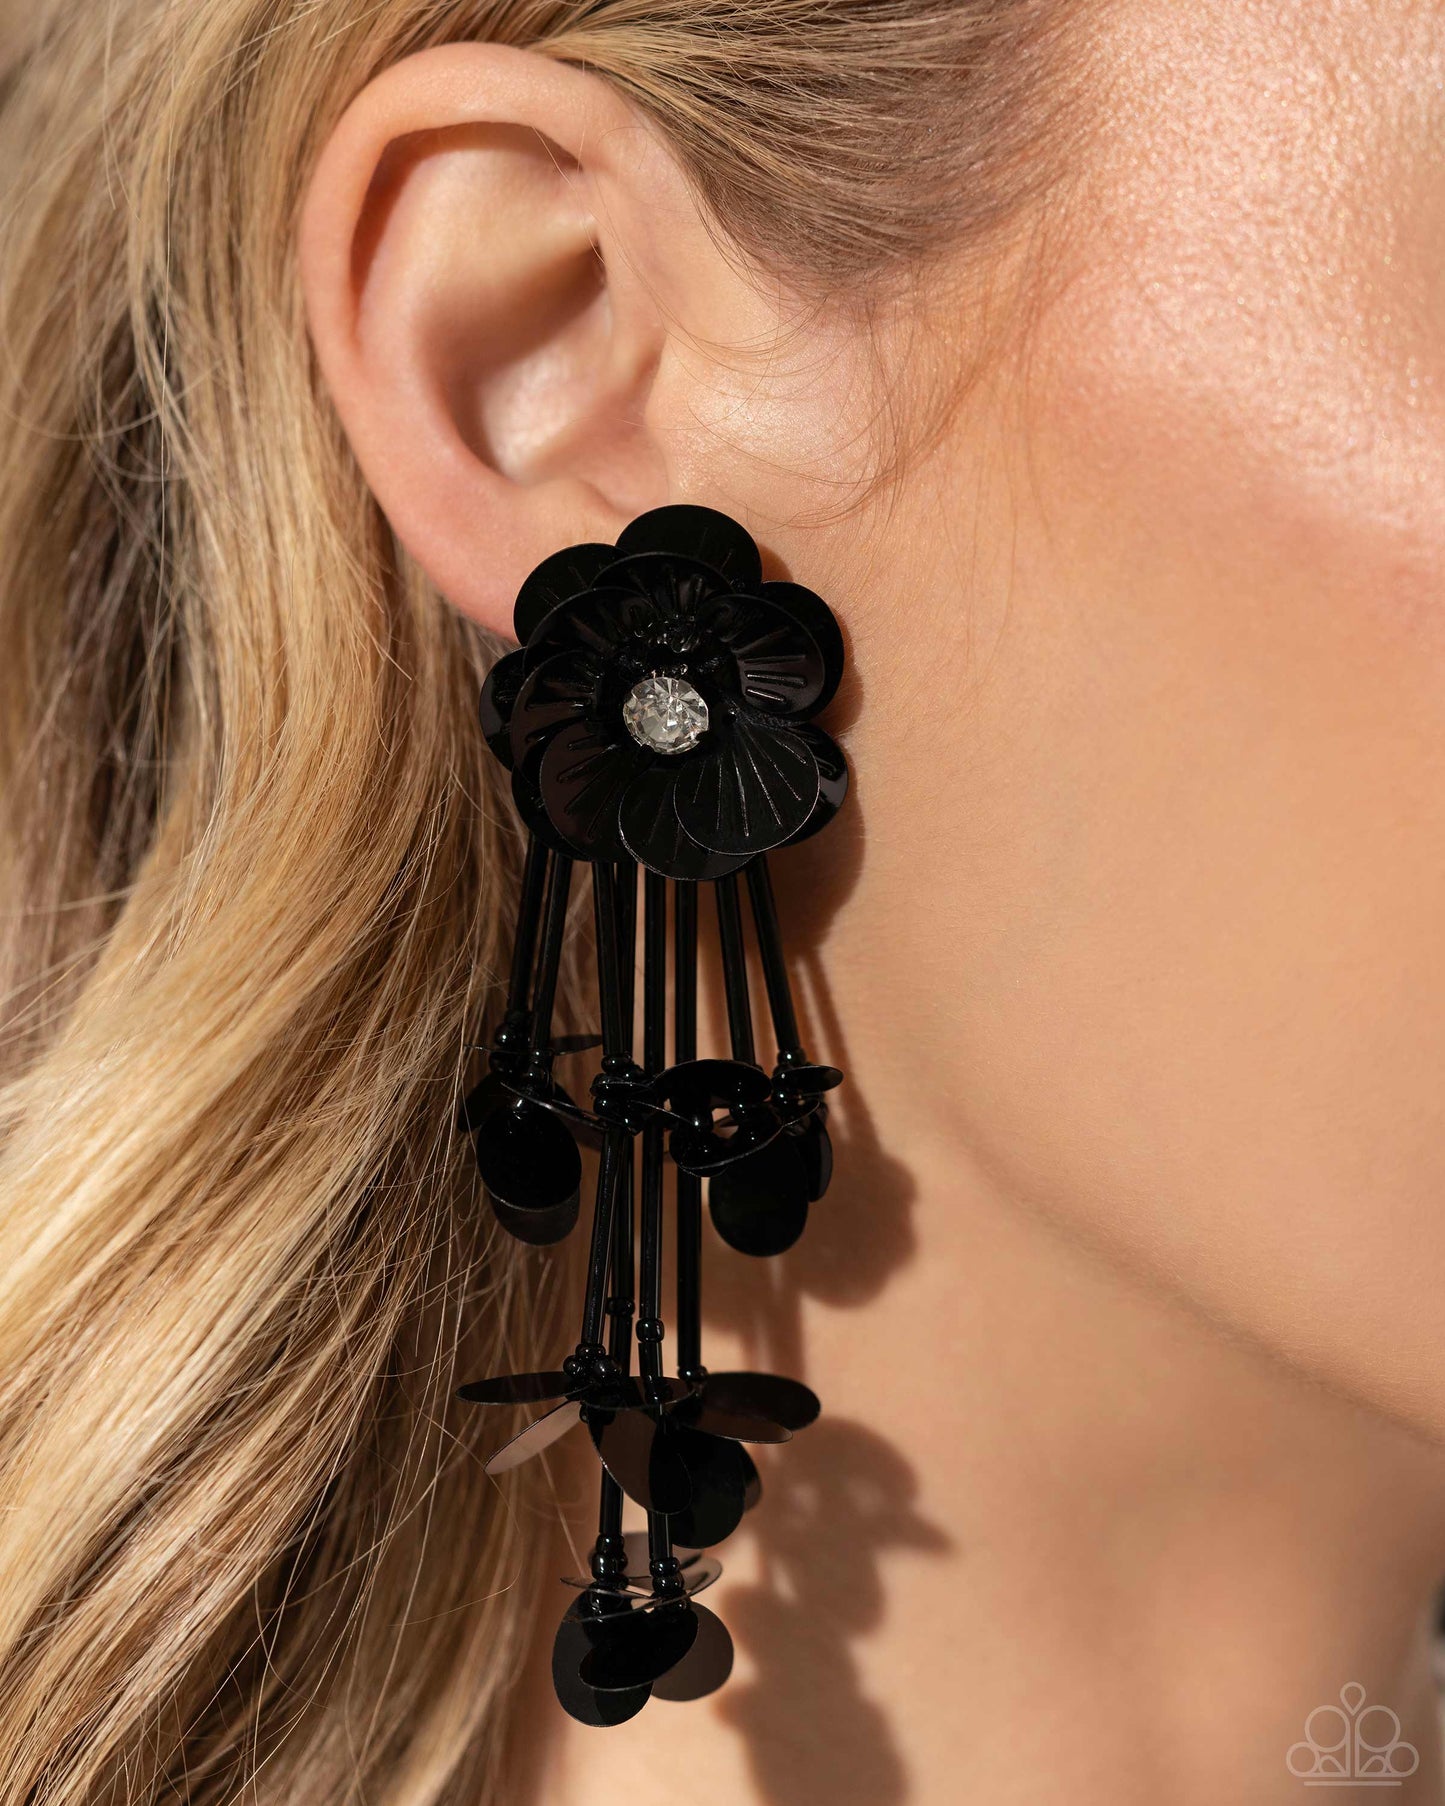 <p data-mce-fragment="1">Blooming from a faceted white gem center, textured black sequin petals give way to a collection of black cylindrical beaded strands that elongate the neck. Sporadically bursting amongst the strands, a collection of simple black sequins flicker and flash for additional eye-catching interest. Earring attaches to a standard post fitting.</p> <p data-mce-fragment="1"><i data-mce-fragment="1">Sold as one pair of post earrings.</i></p>